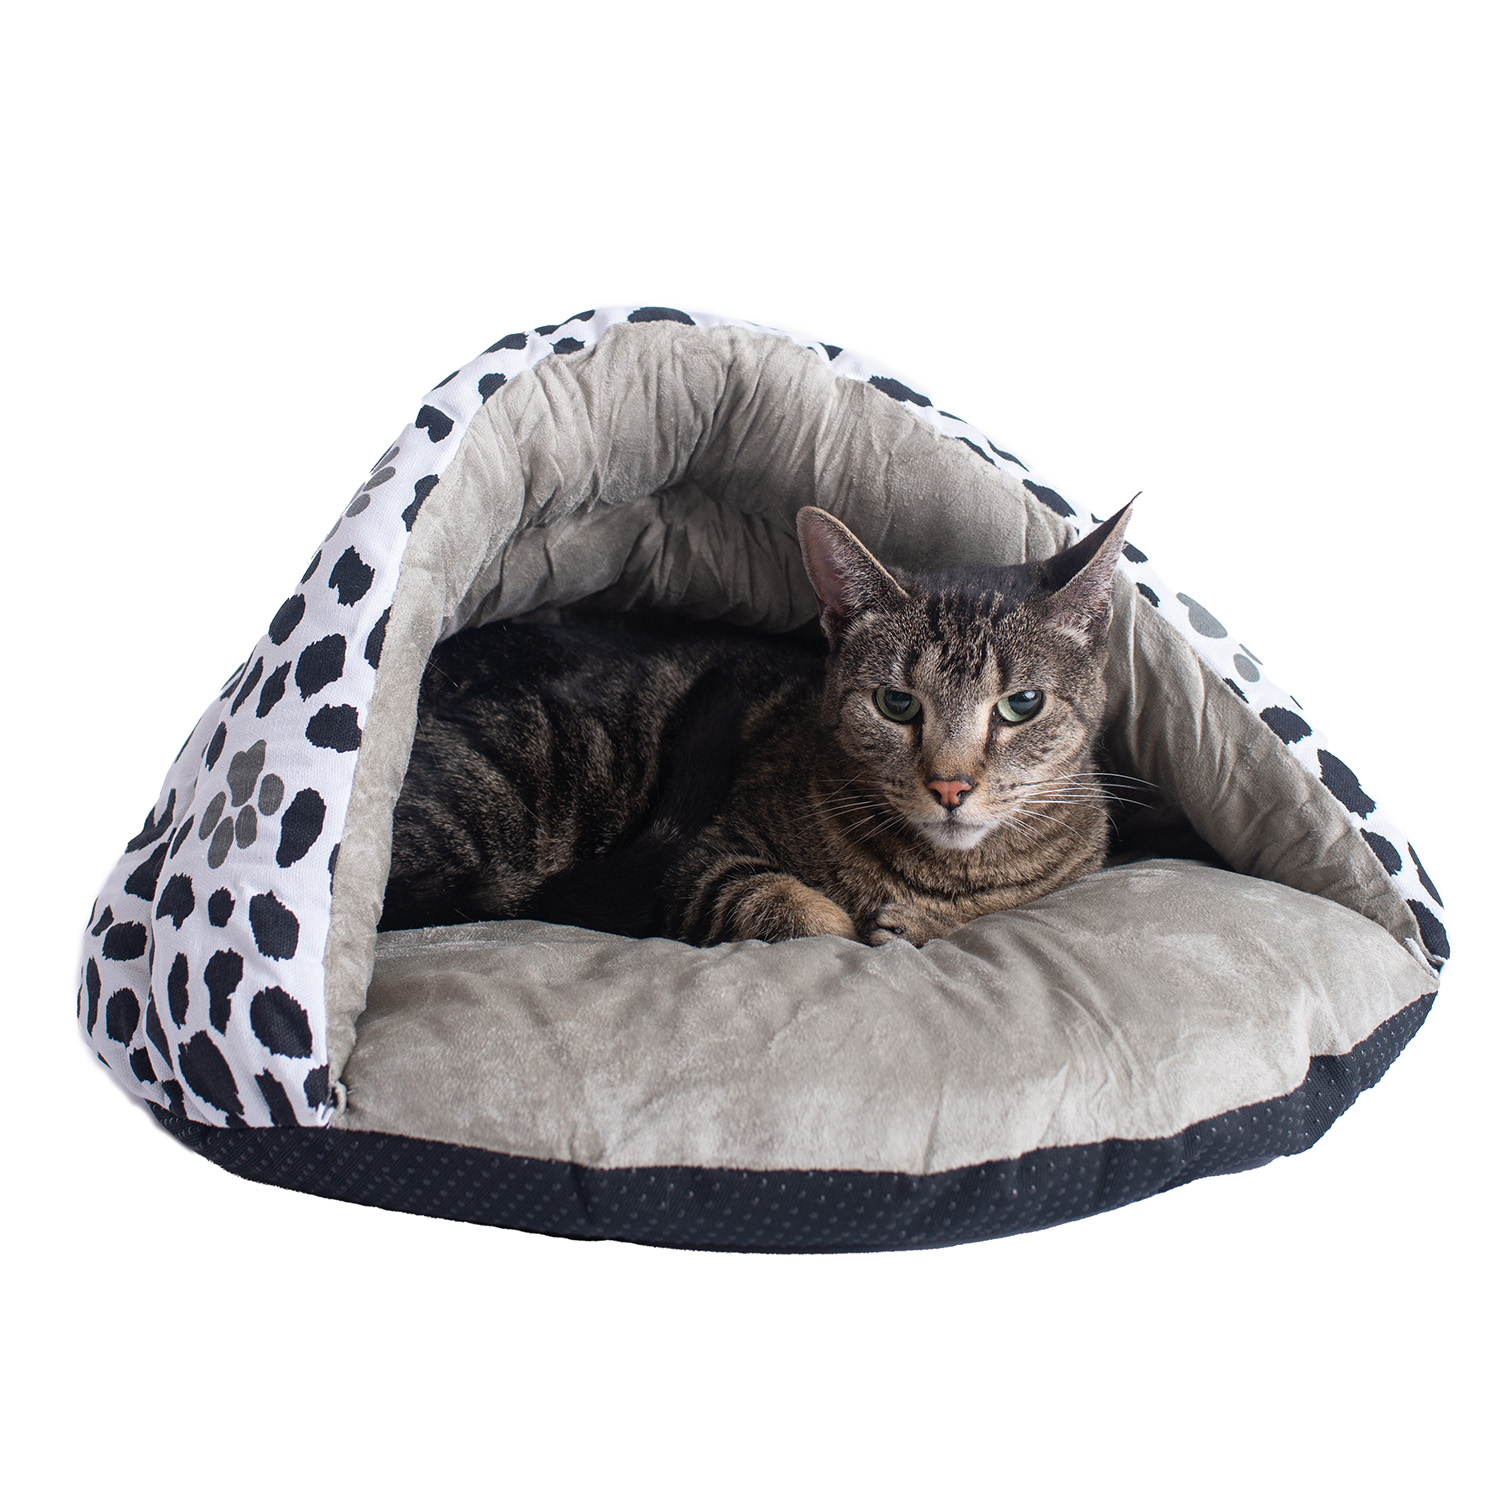 Paw Print Canvas Cave Cat Bed from Armarkat